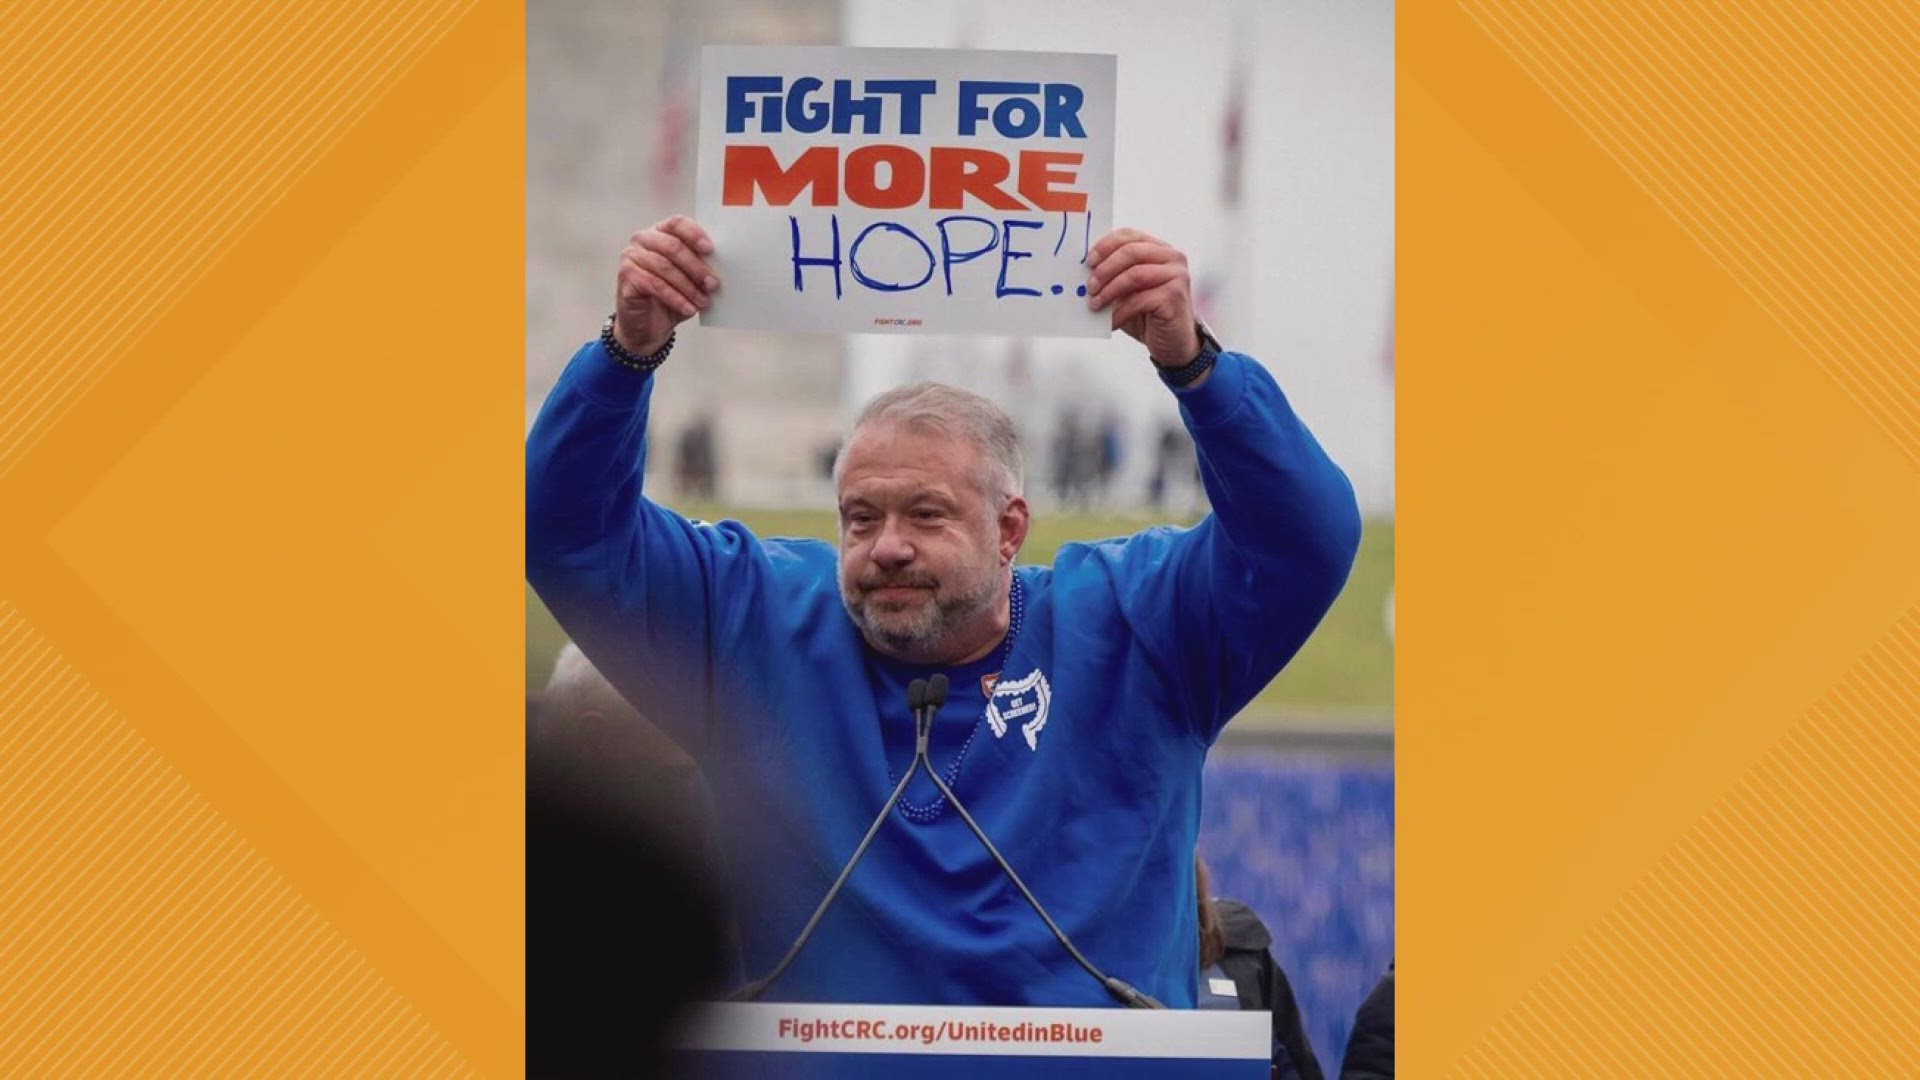 Michael Holtz is a Colon Cancer survivor. He now spreads awareness about the deadly disease.